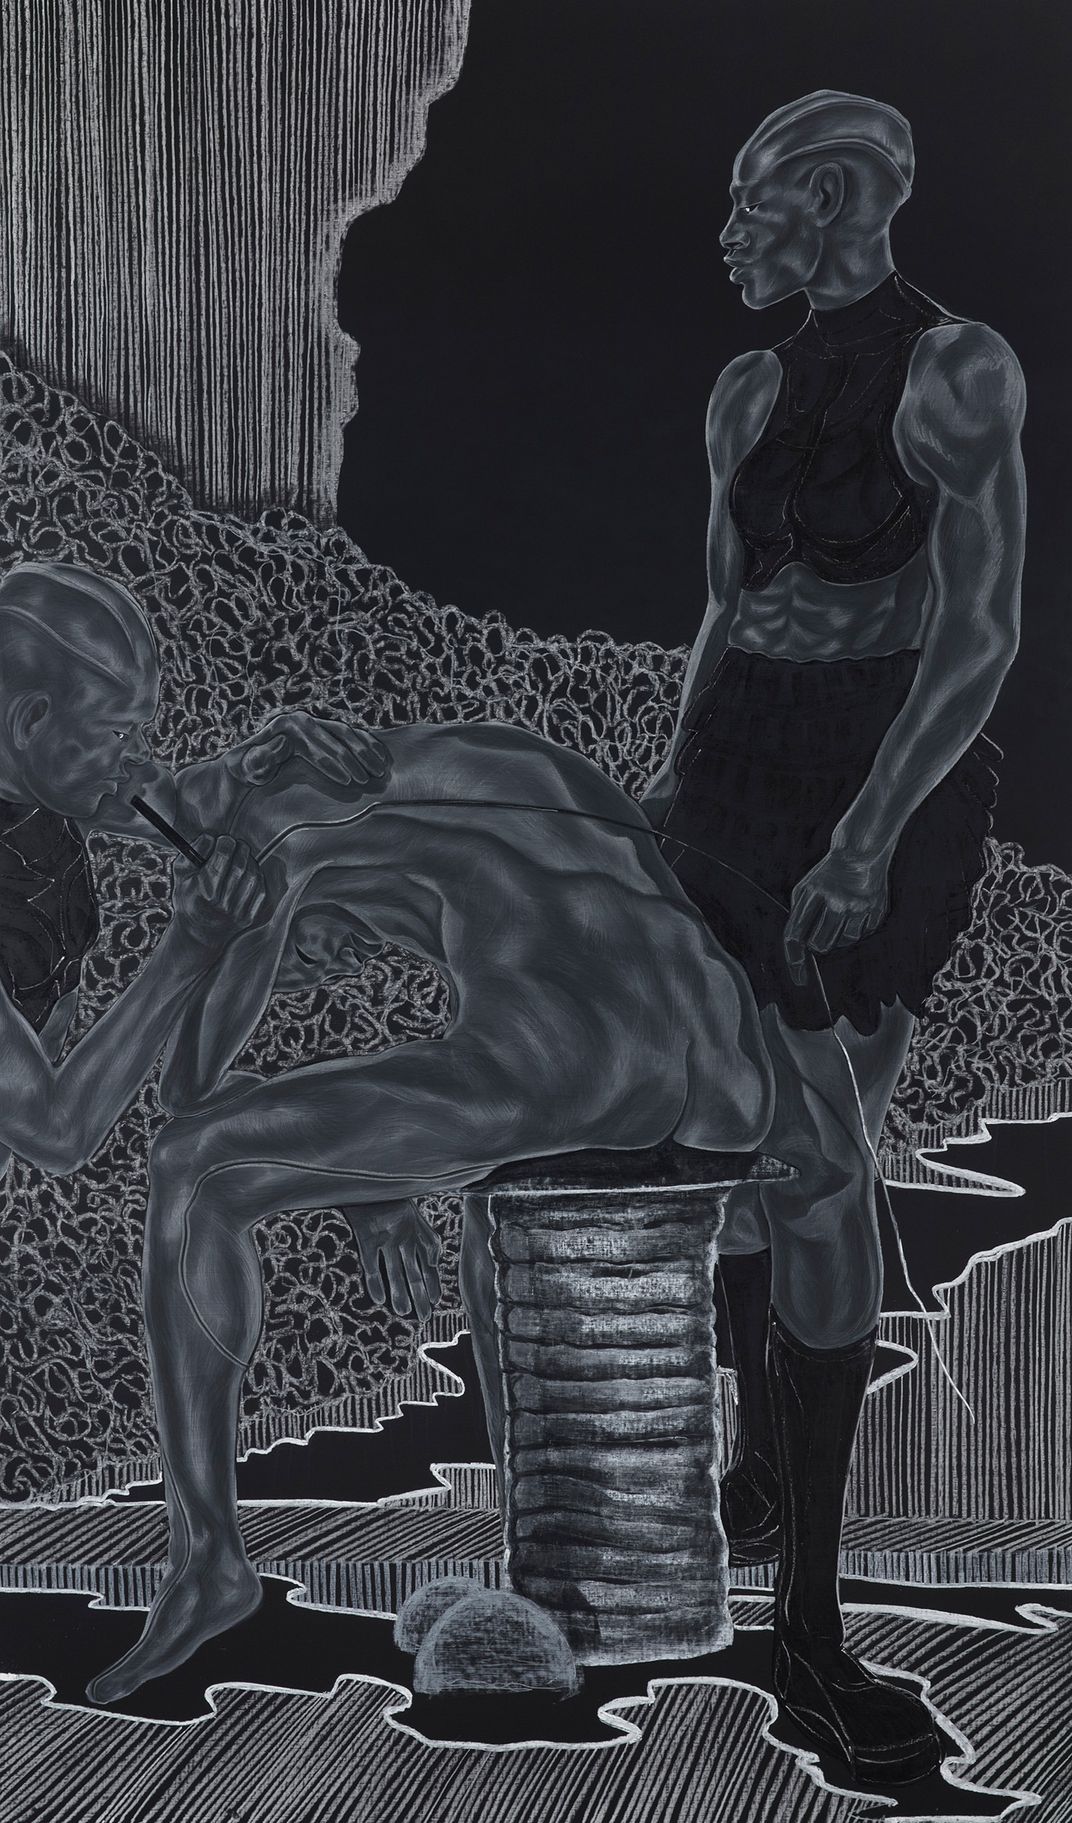 This is How You Were Made; Final Stages by Toyin Ojih Odutola